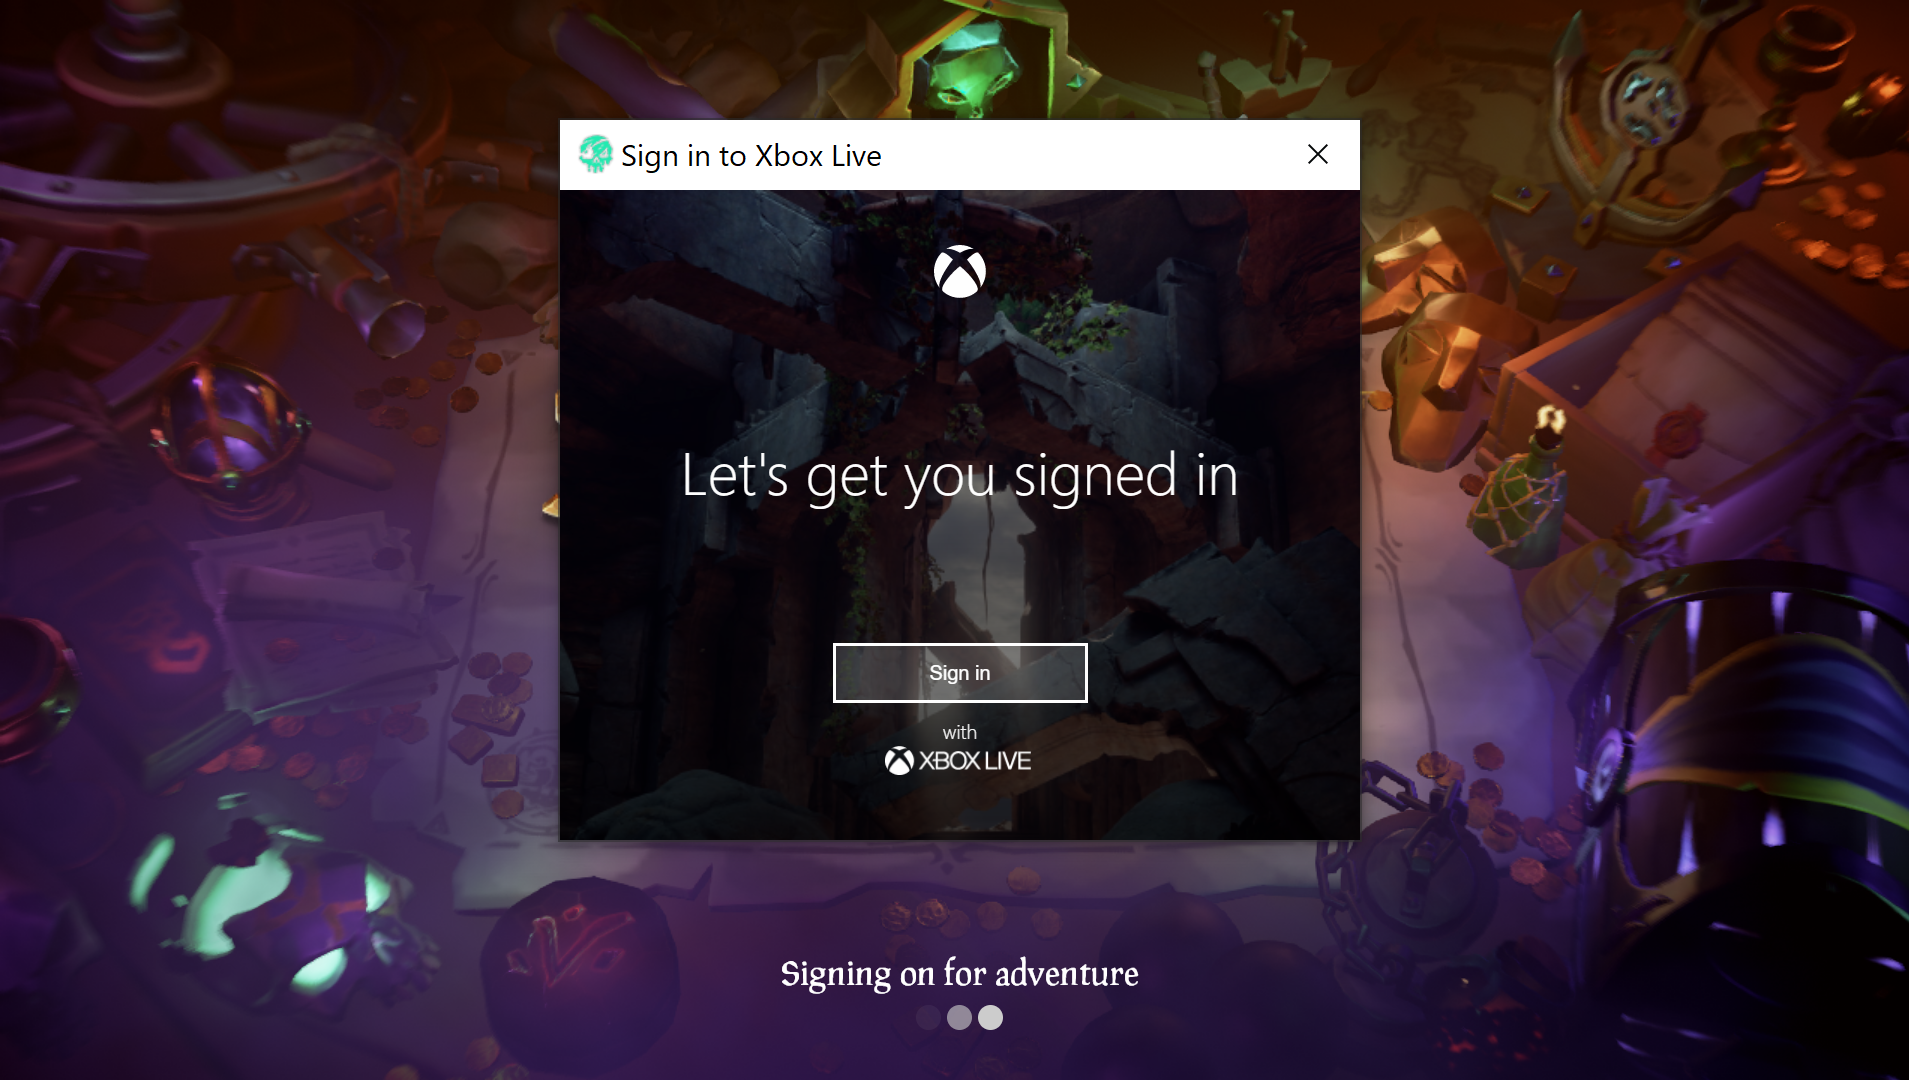 Screenshot showing the Xbox Live login prompt